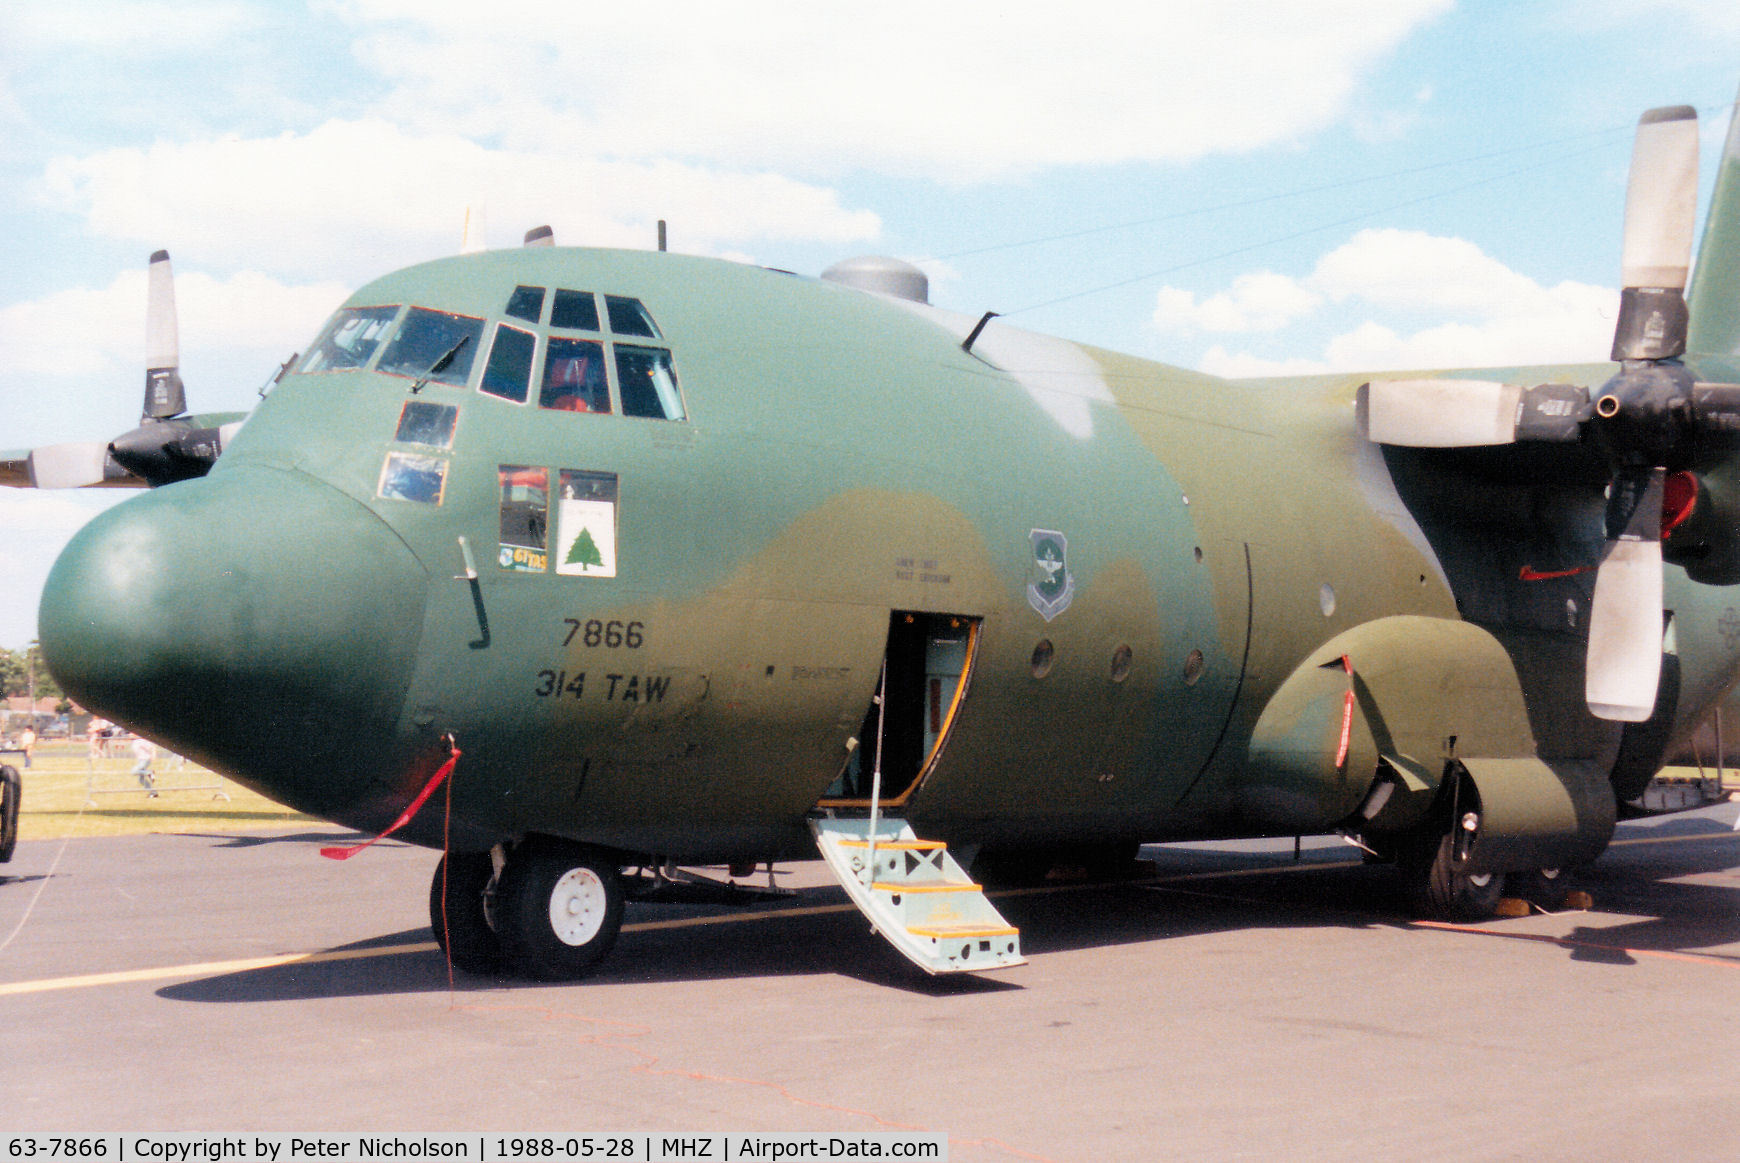 63-7866, 1963 Lockheed C-130E Hercules C/N 382-3936, C-130E Hercules of Little Rock AFB's 314th Tactical Airlift Wing on display at the 1988 RAF Mildenhall Air Fete.